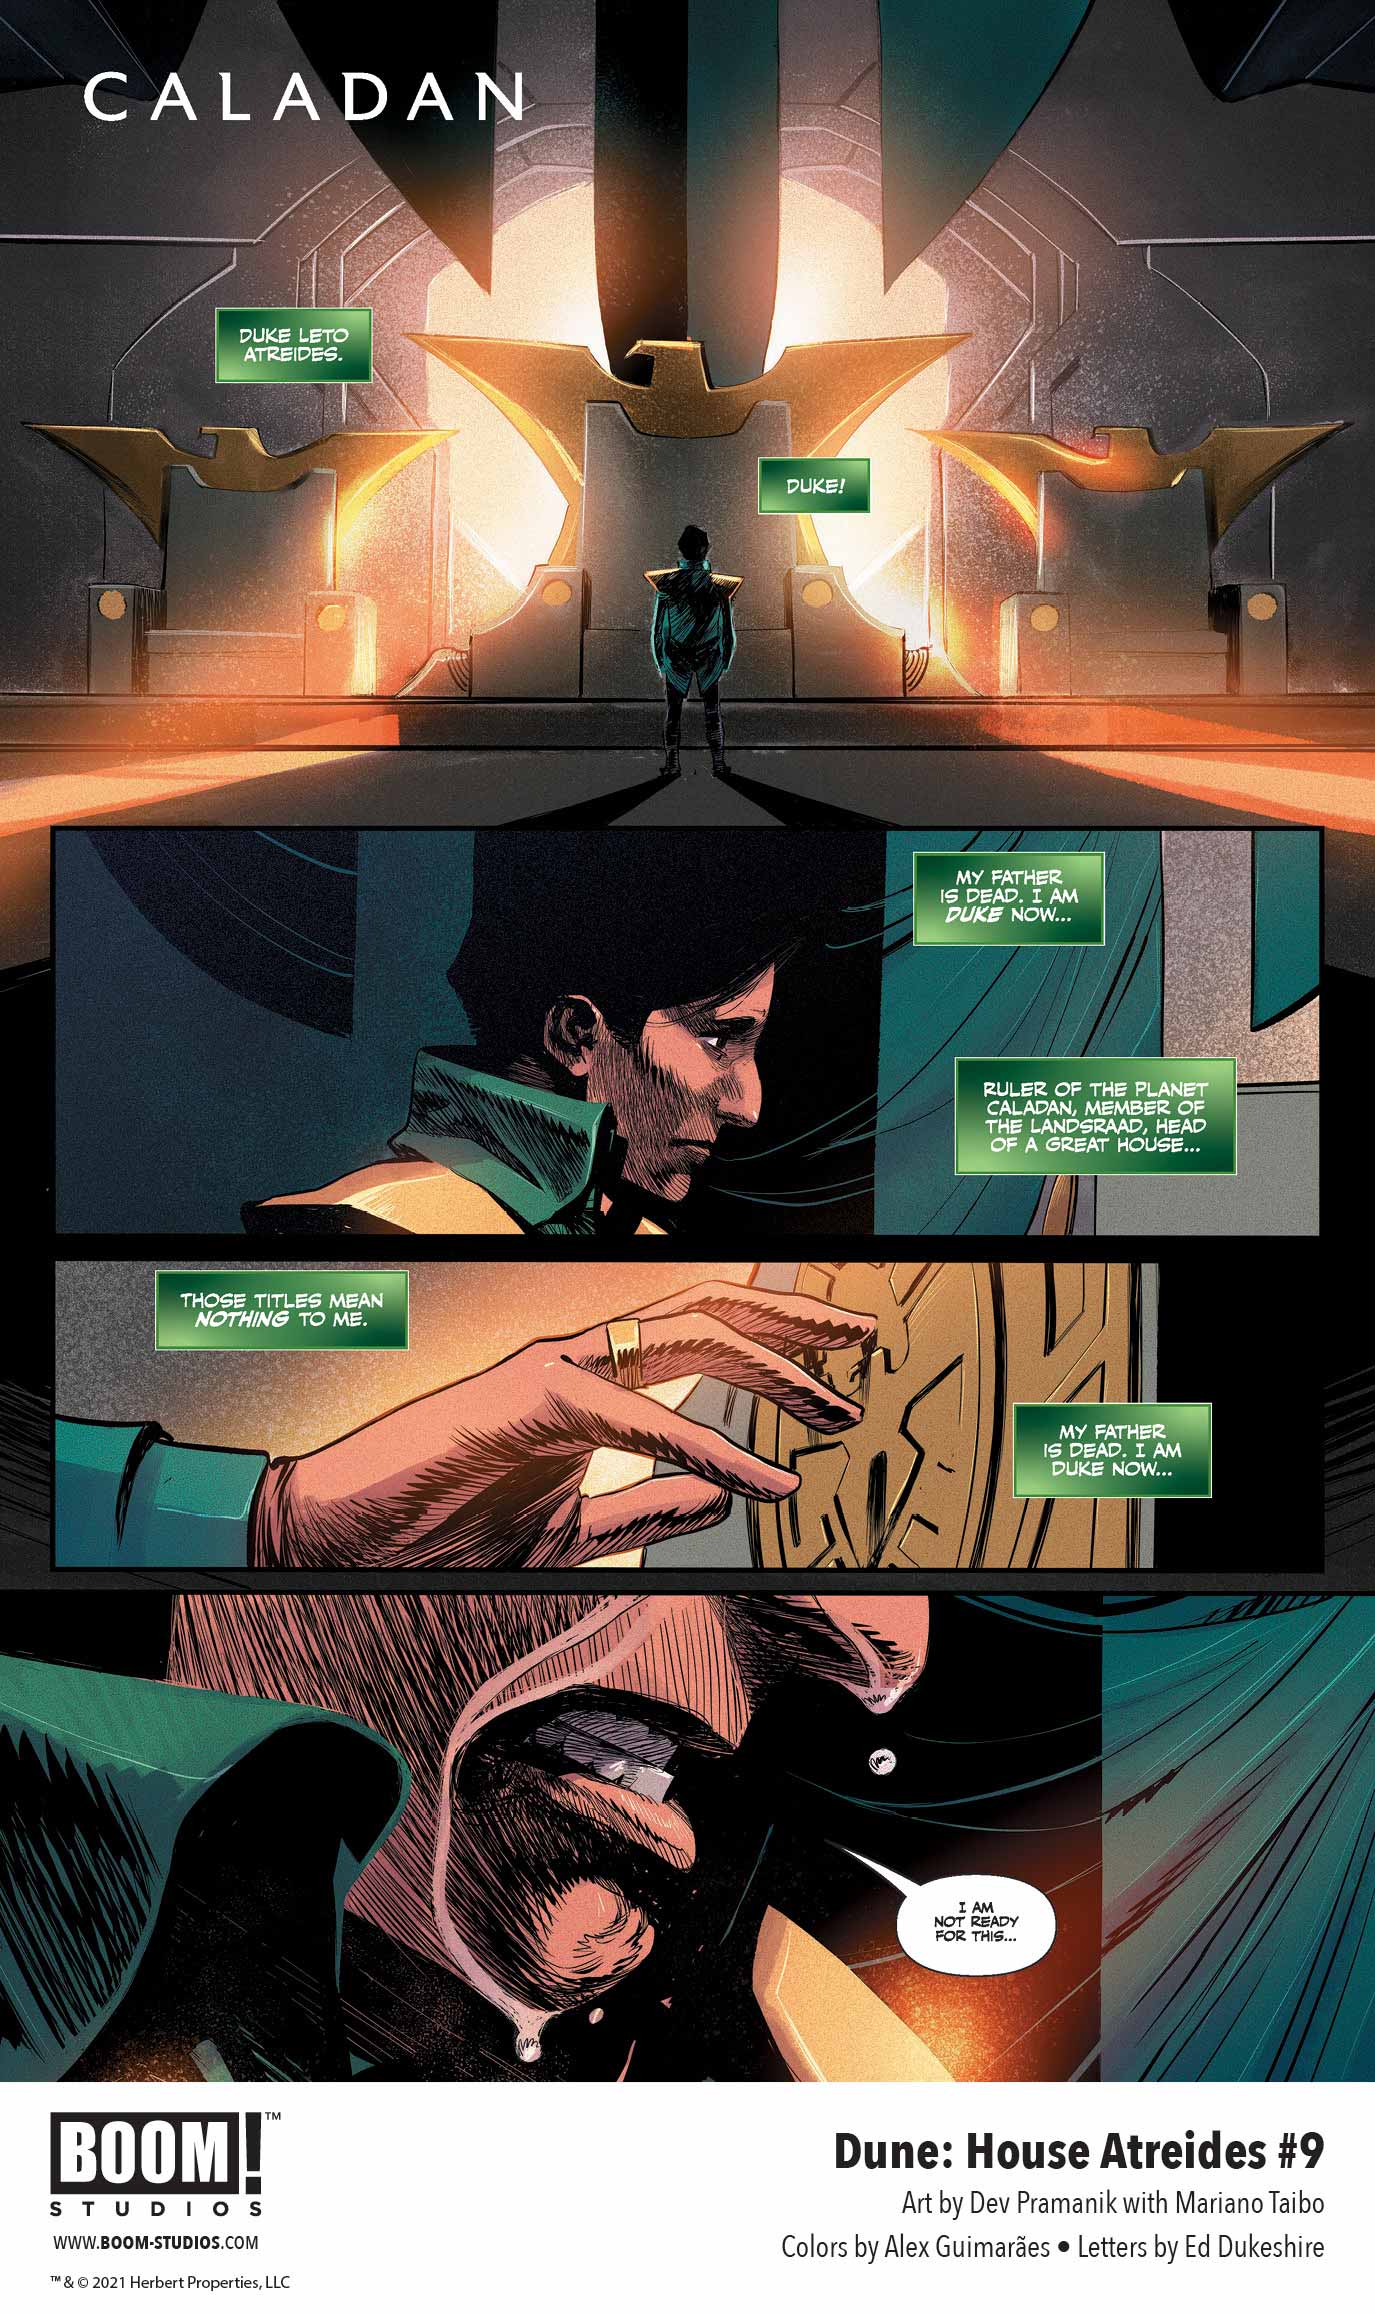 Dune: House Atreides comic series. Issue #9, preview page 1.